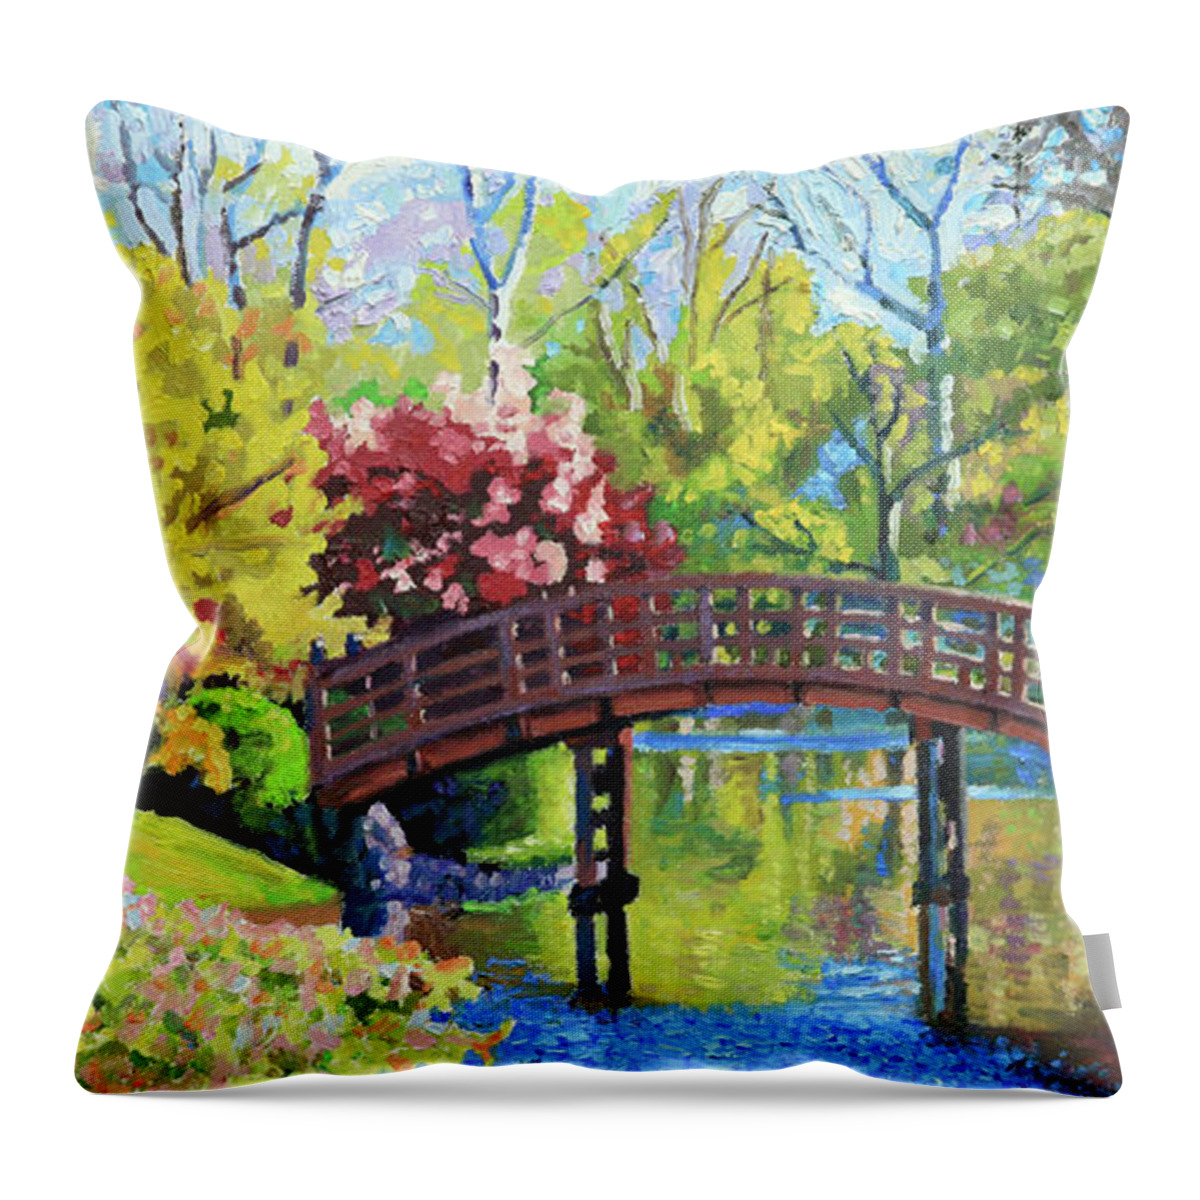 Autumn Throw Pillow featuring the painting Drum Bridge in Autumn by John Lautermilch